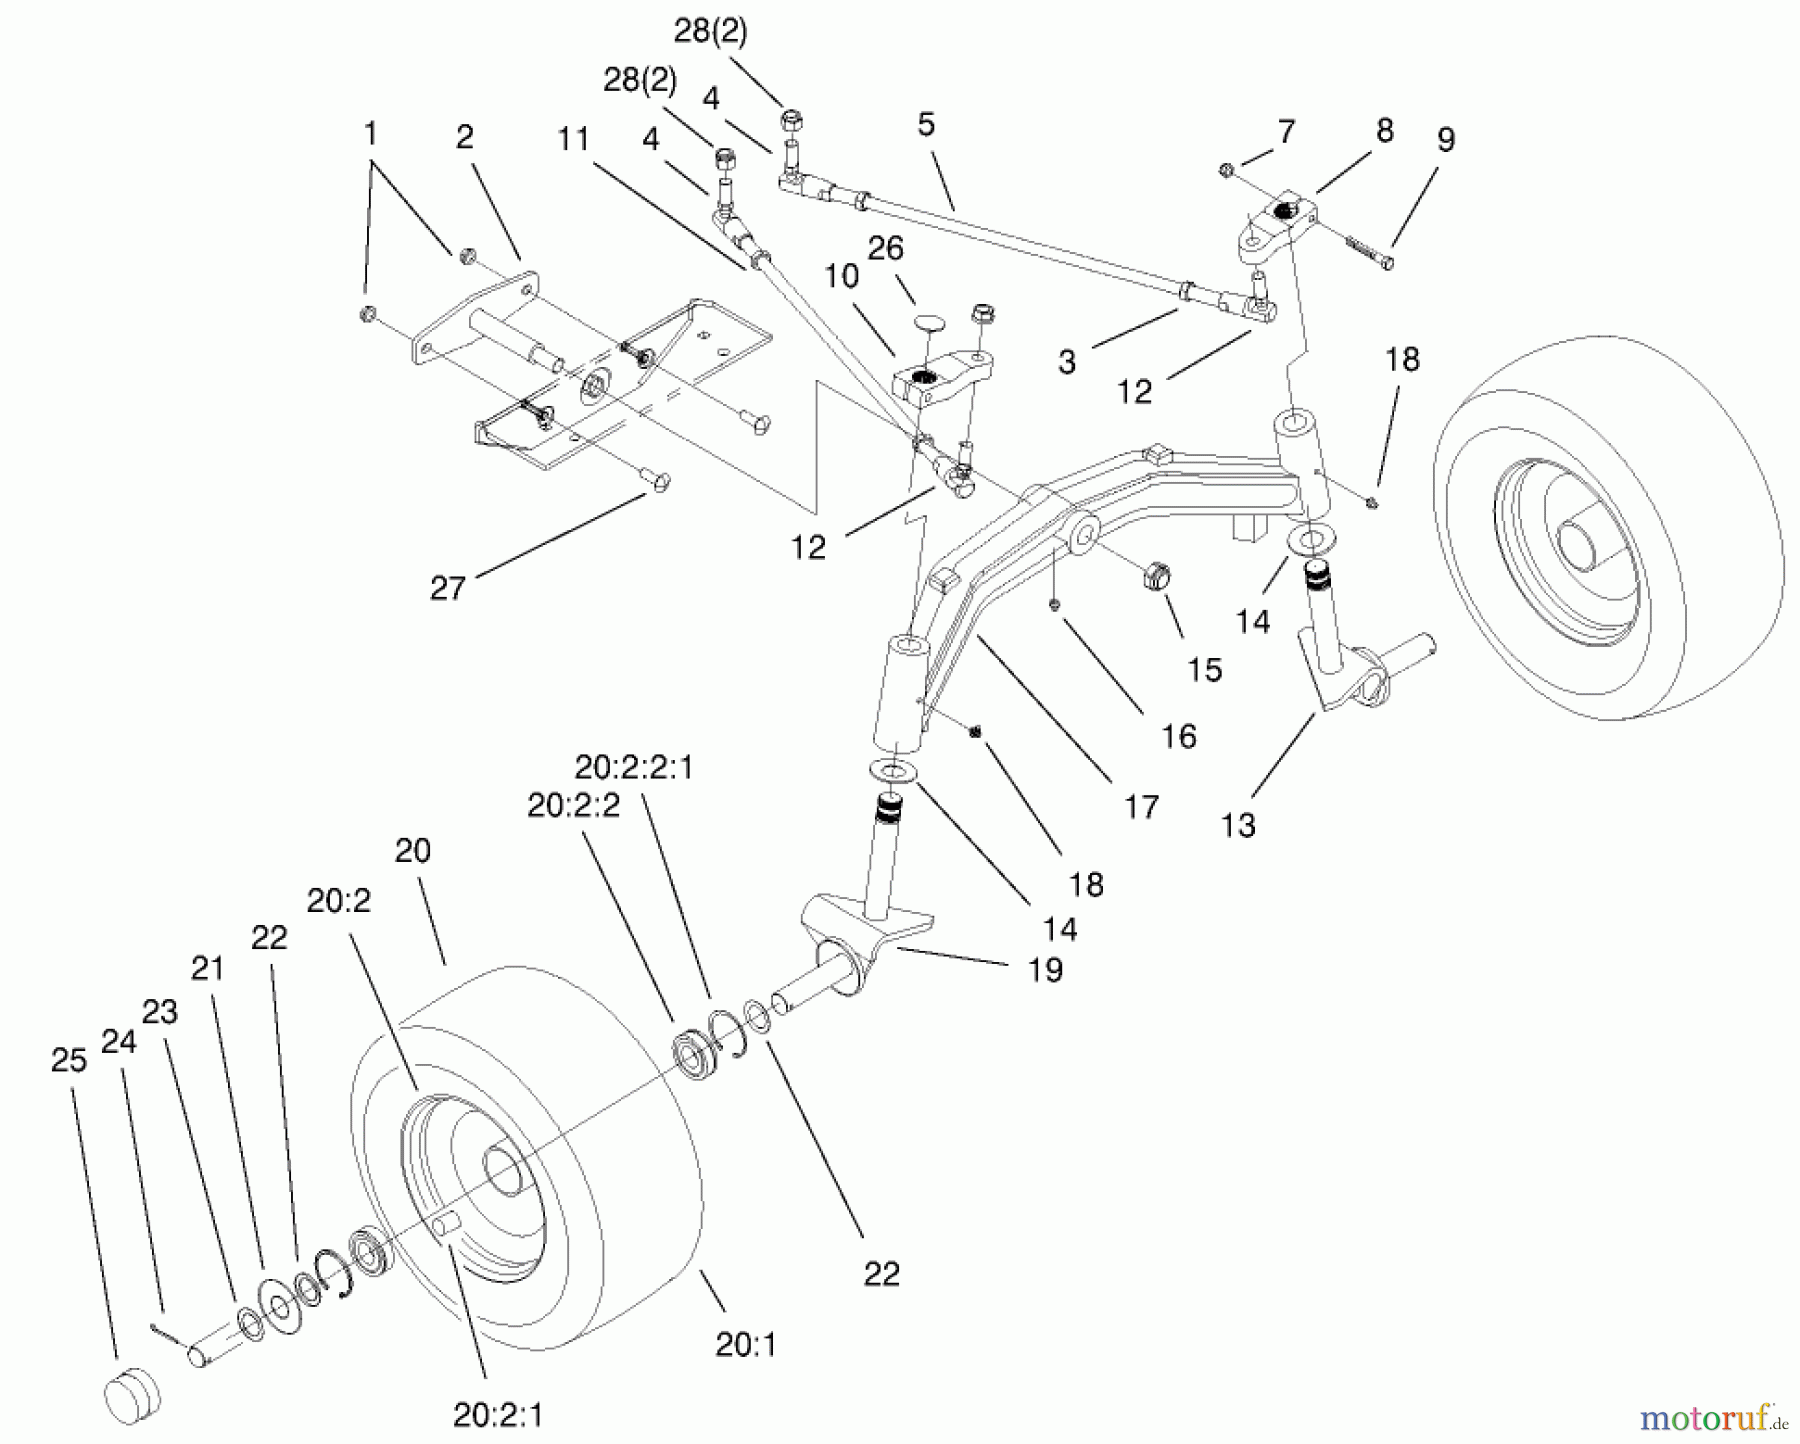  Toro Neu Mowers, Lawn & Garden Tractor Seite 1 73547 (520Lxi) - Toro 520Lxi Garden Tractor, 2000 (200000242-200999999) TIE RODS, SPINDLE, & FRONT AXLE ASSEMBLY